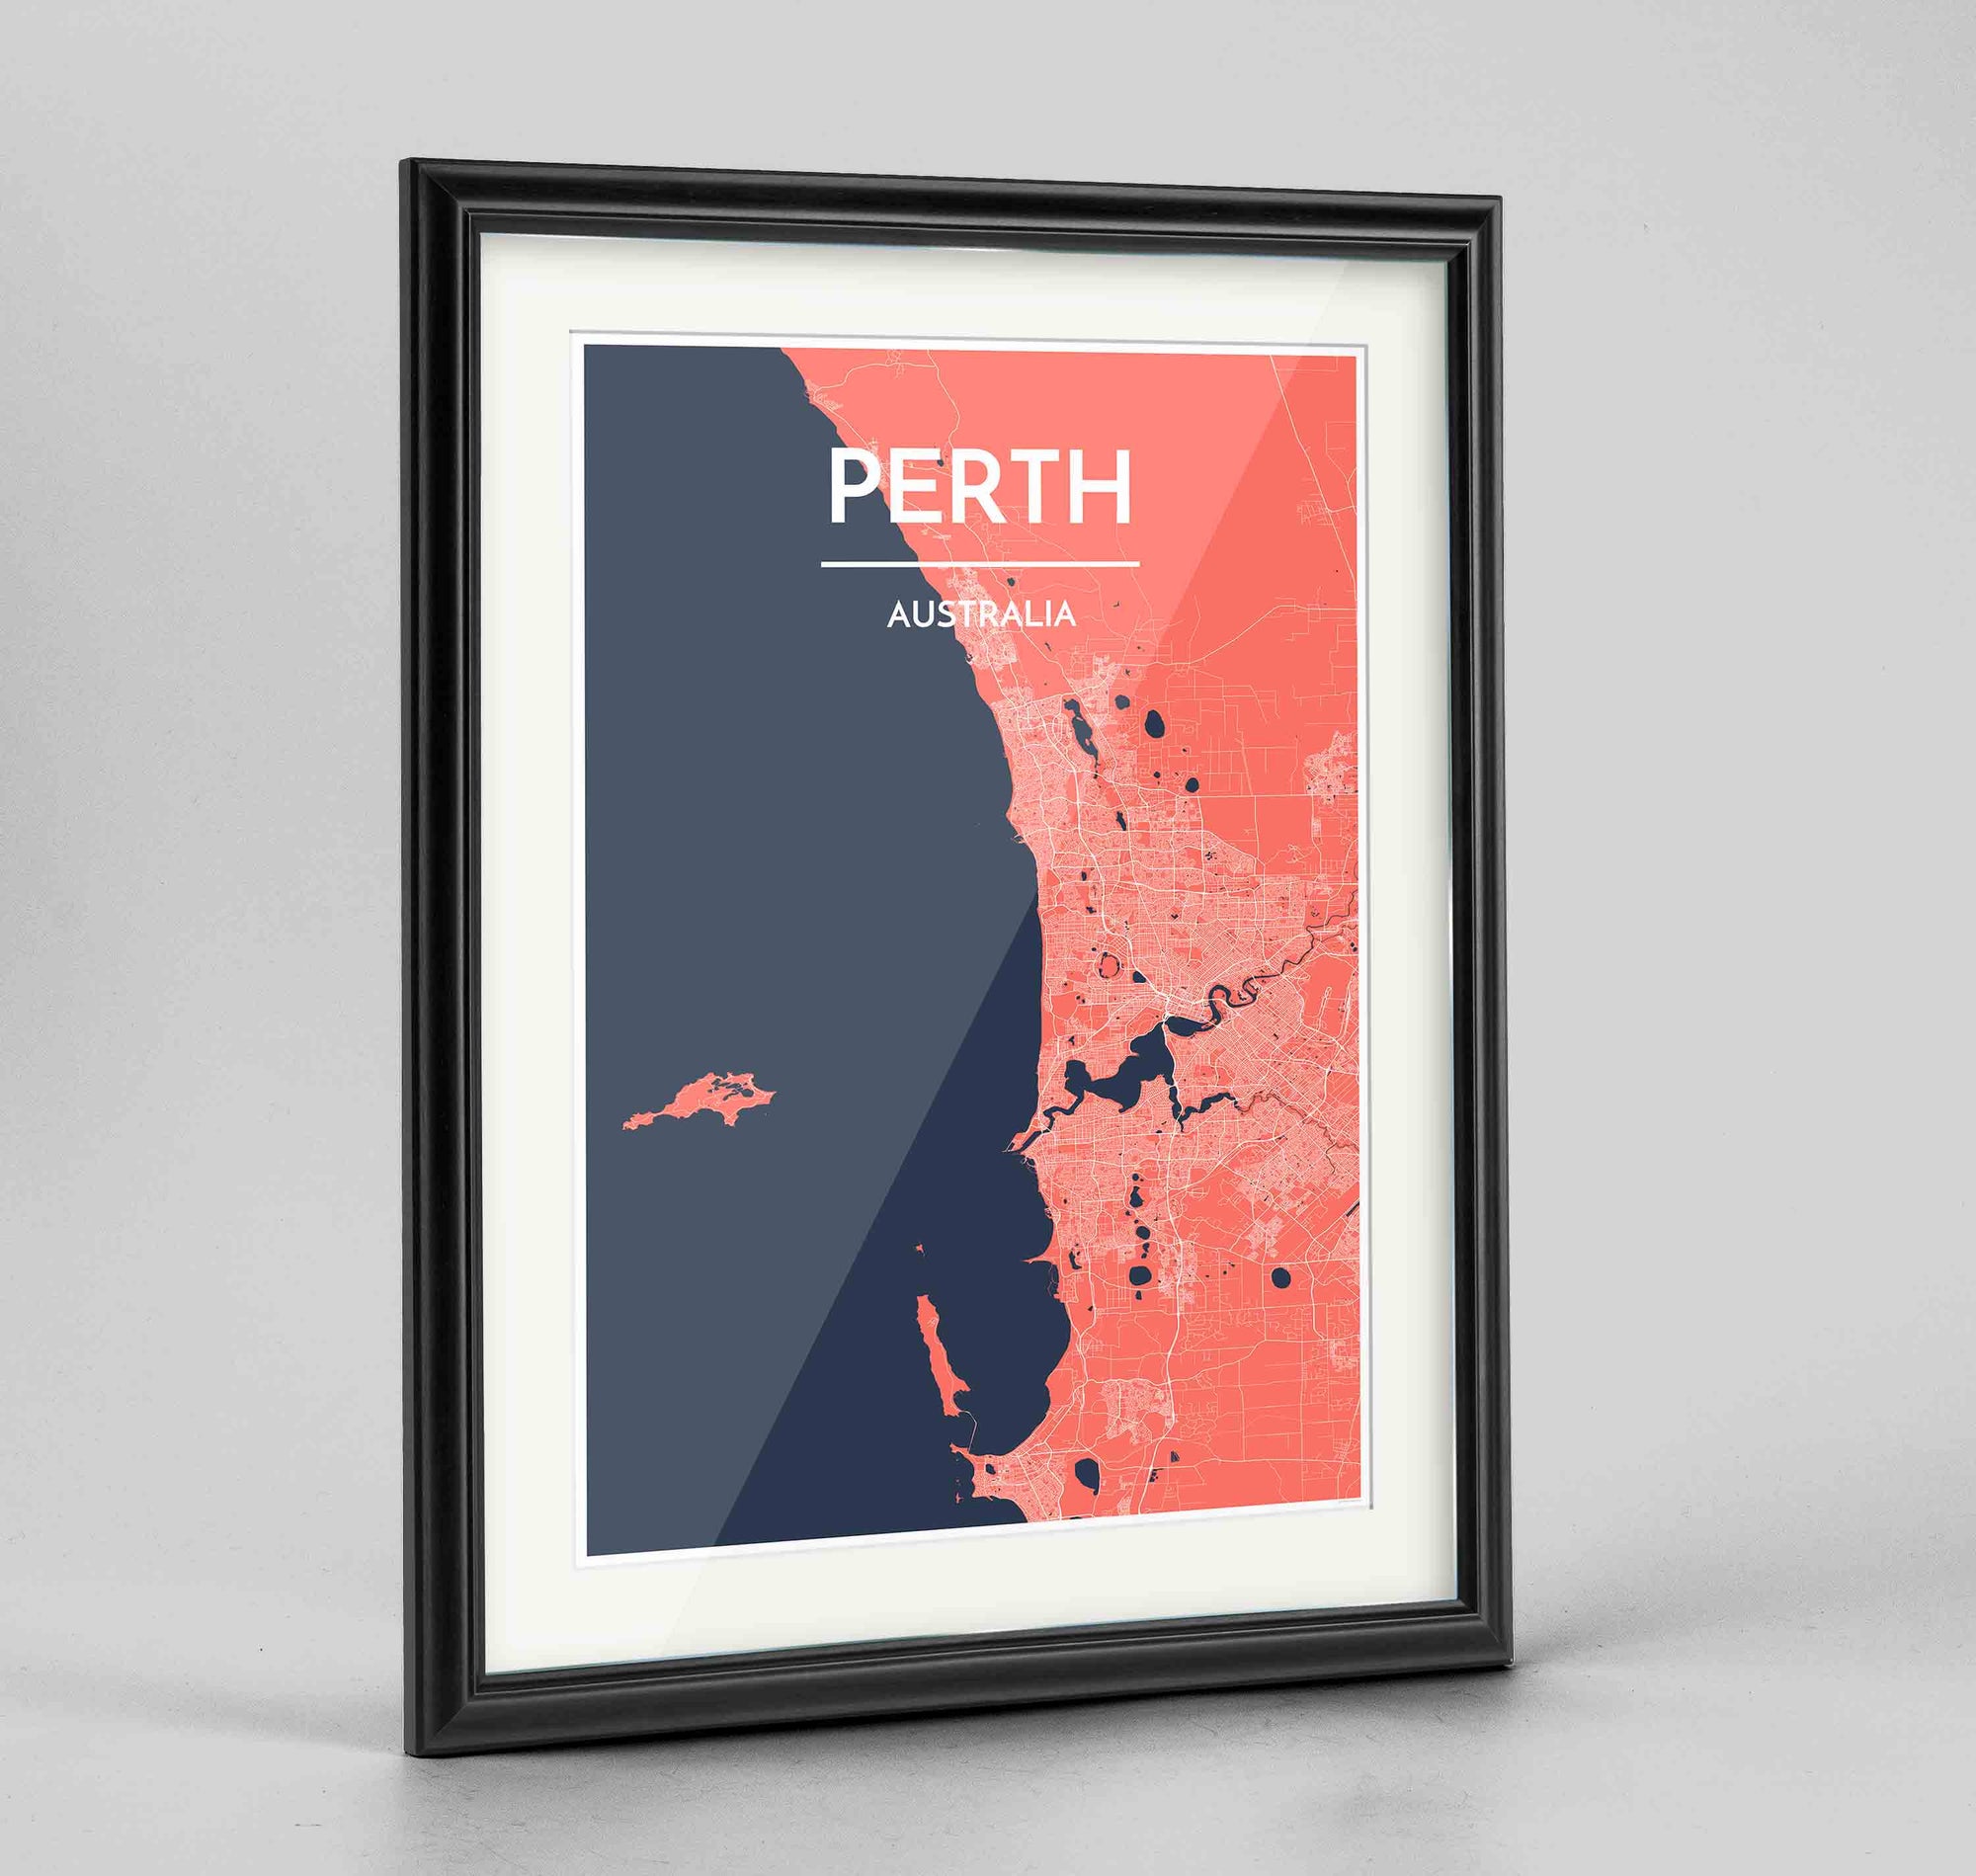 Framed Perth Map Art Print 24x36" Traditional Black frame Point Two Design Group